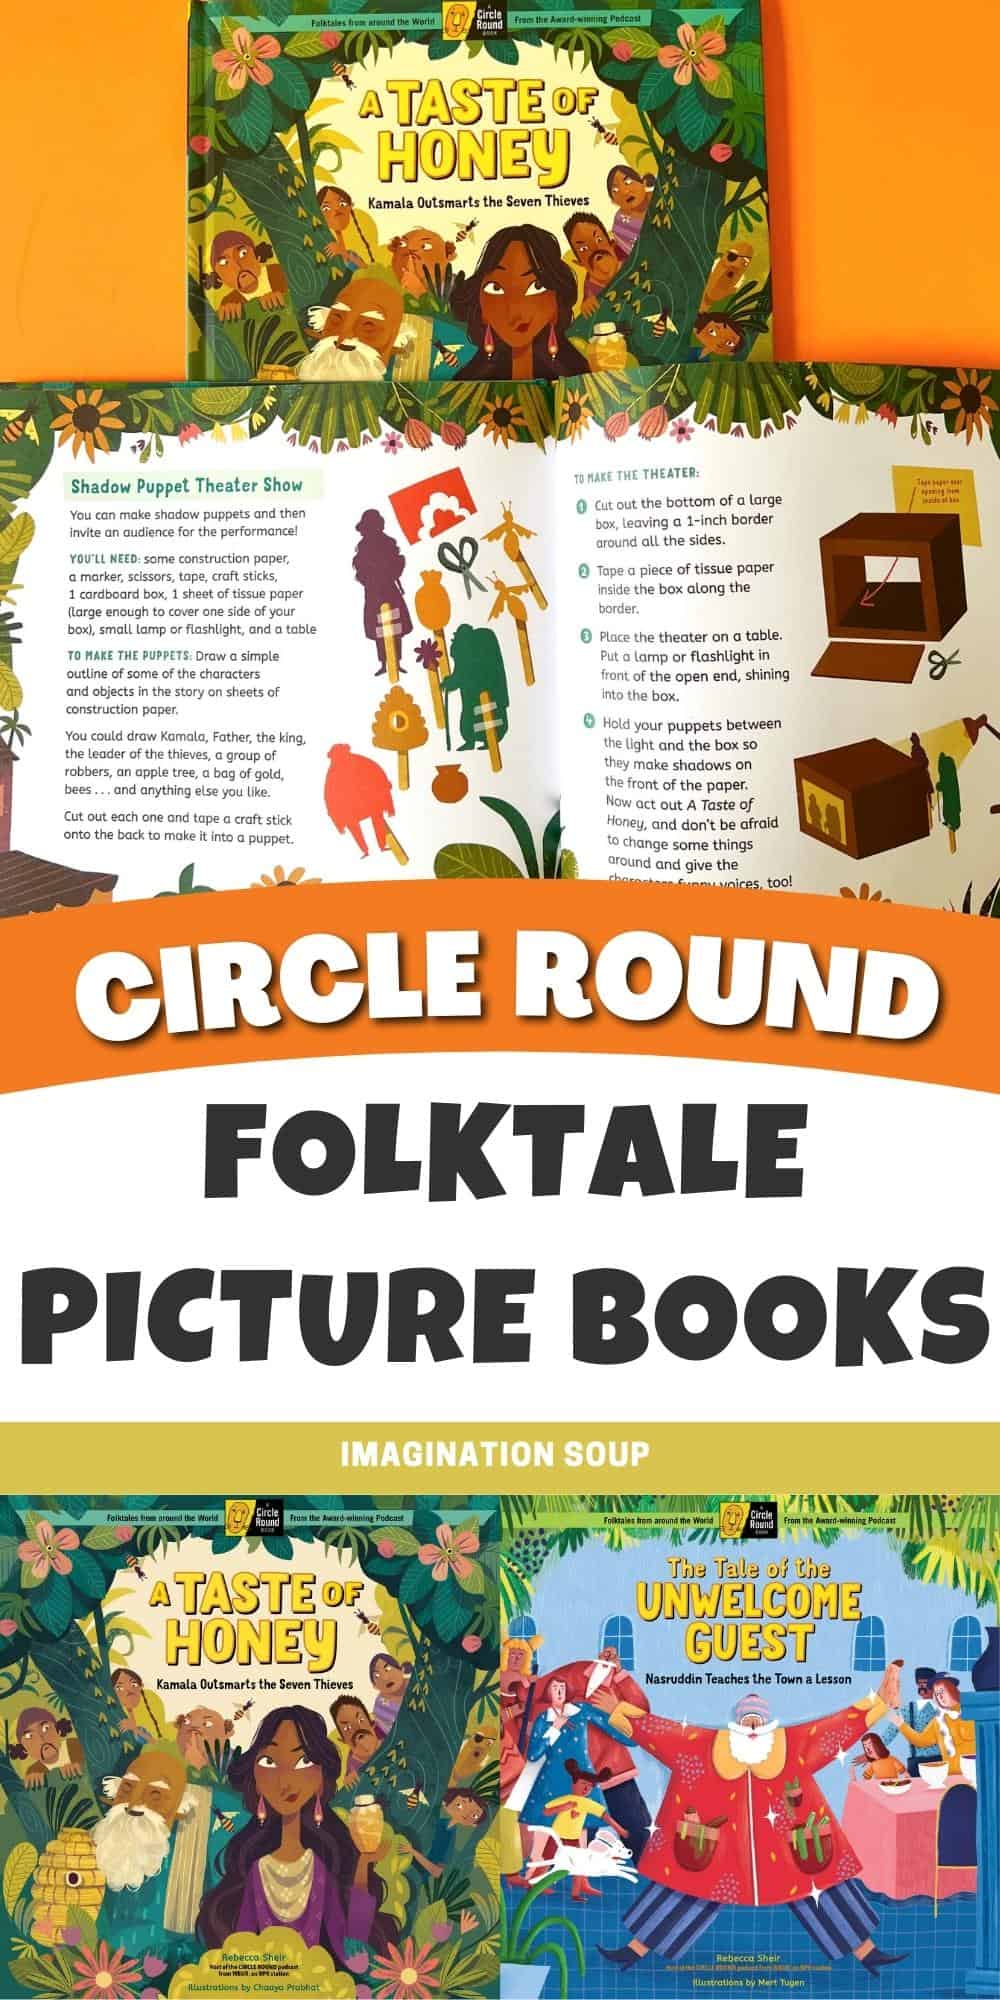 Amazing Circle Round Folktale Picture Books with Storytelling Activities